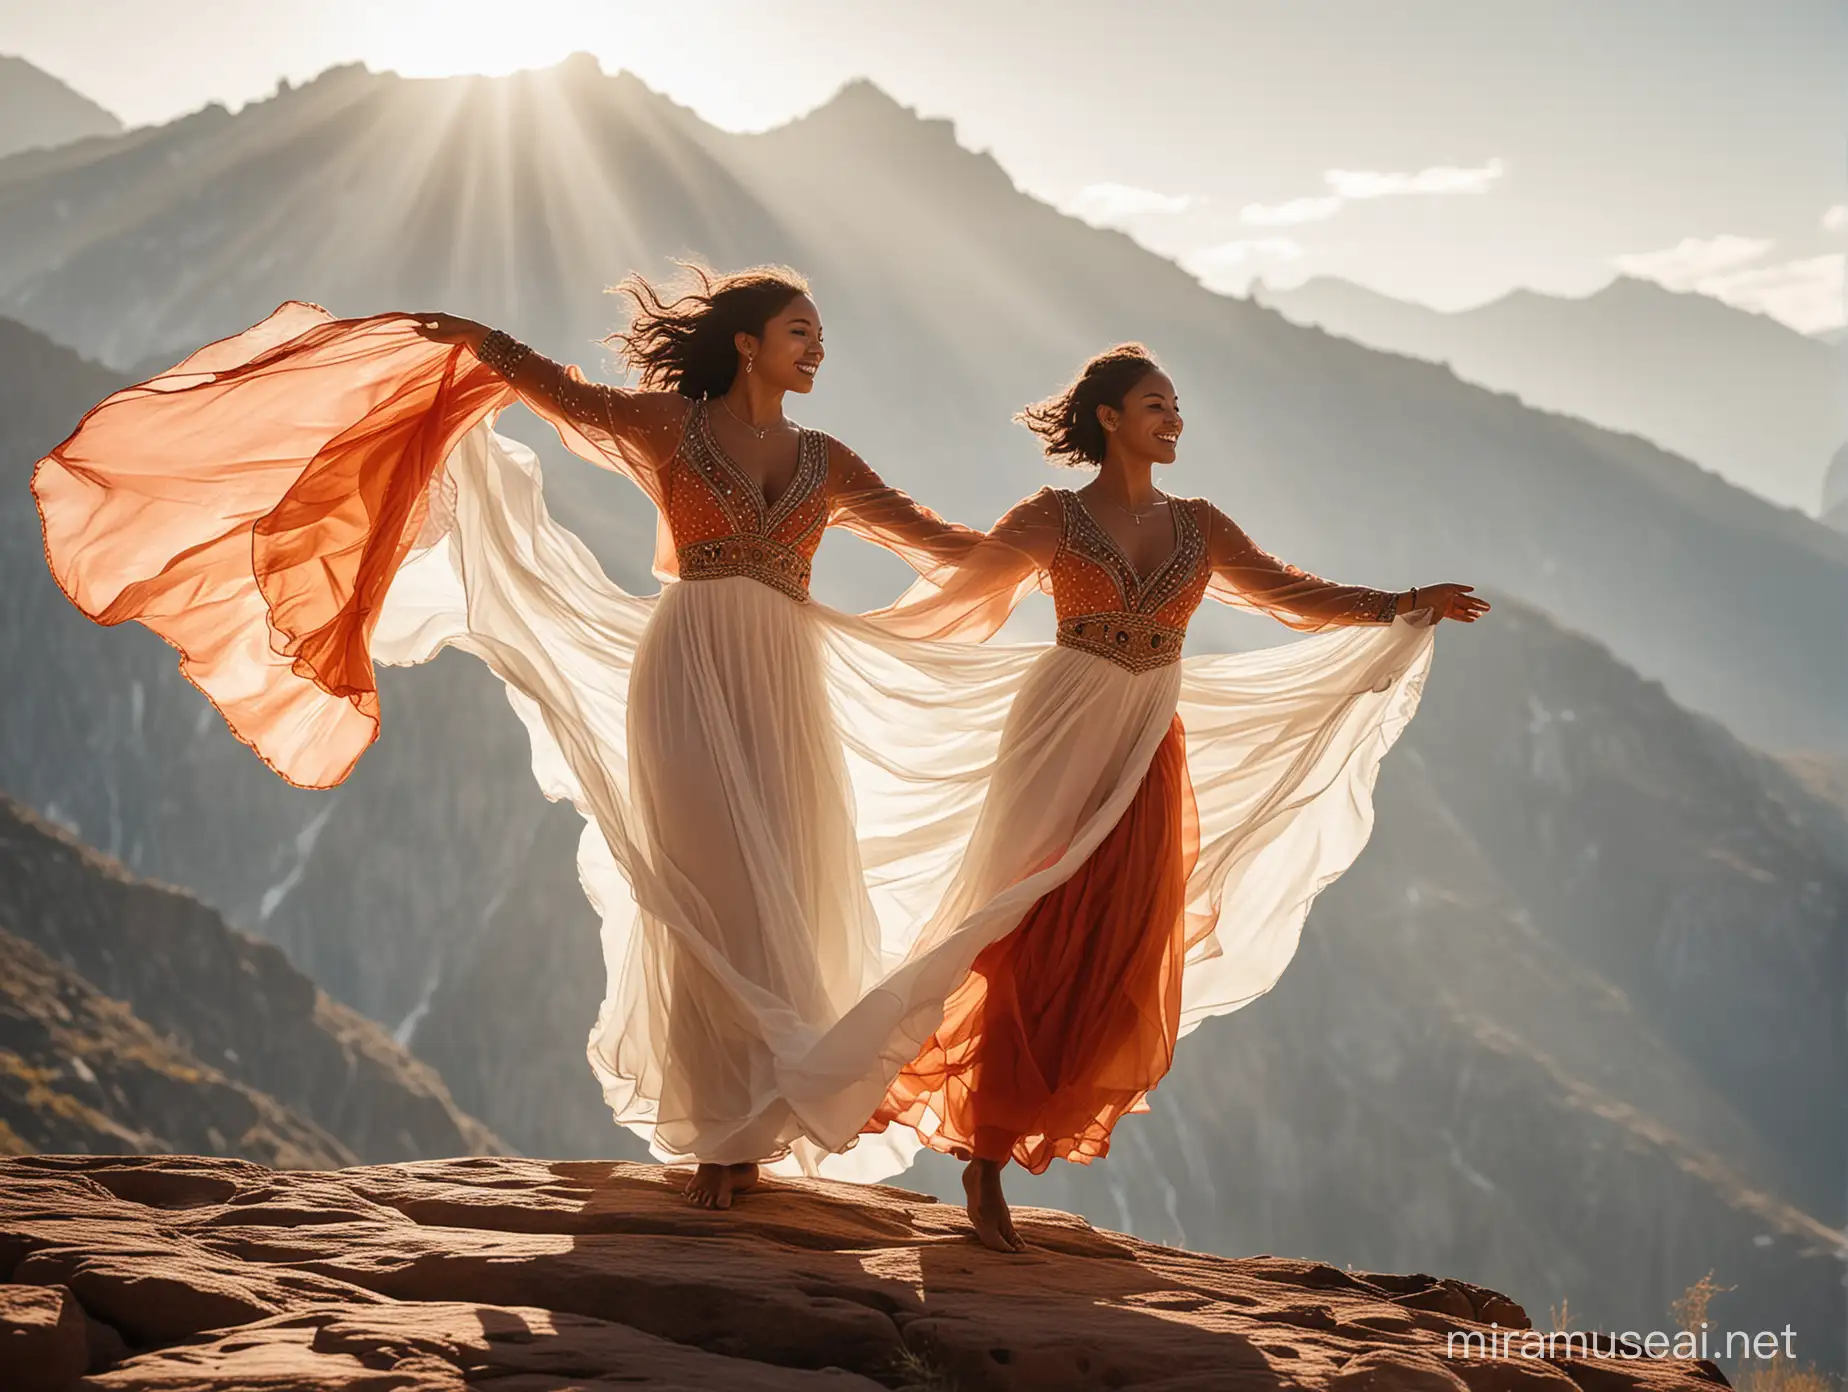 brown skinned praise dancer. she's wearing a colorful chiffon layered dress with long sleeves. she is dancing on a mountain top. there are 4 other dancers running towards her excitedly with white long flags in their hands. the main dancer is holding a long white cloth in her hands billowing in the wind. beams if sunlight illuminates her. 